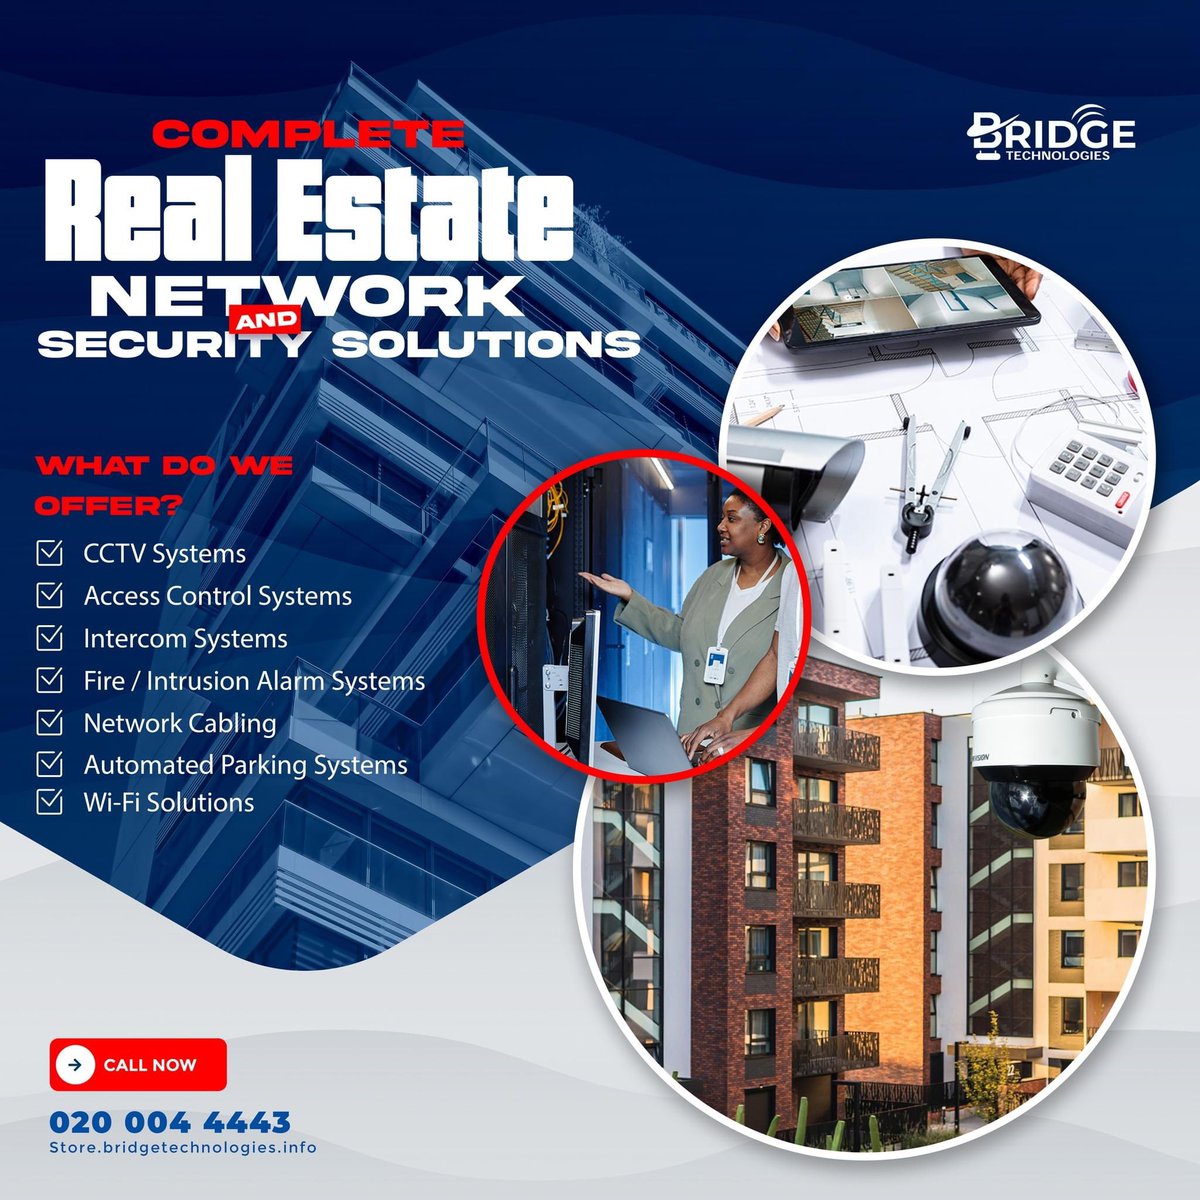 At Bridge Technologies we provide complete real estate network and security solutions. Here's what we offer:

Call us on 0200044443 or email at sales@bridgetechnologies.info. For more information.

#BridgeTechnologies  #Services #RealEstate #Apartments #Ghana